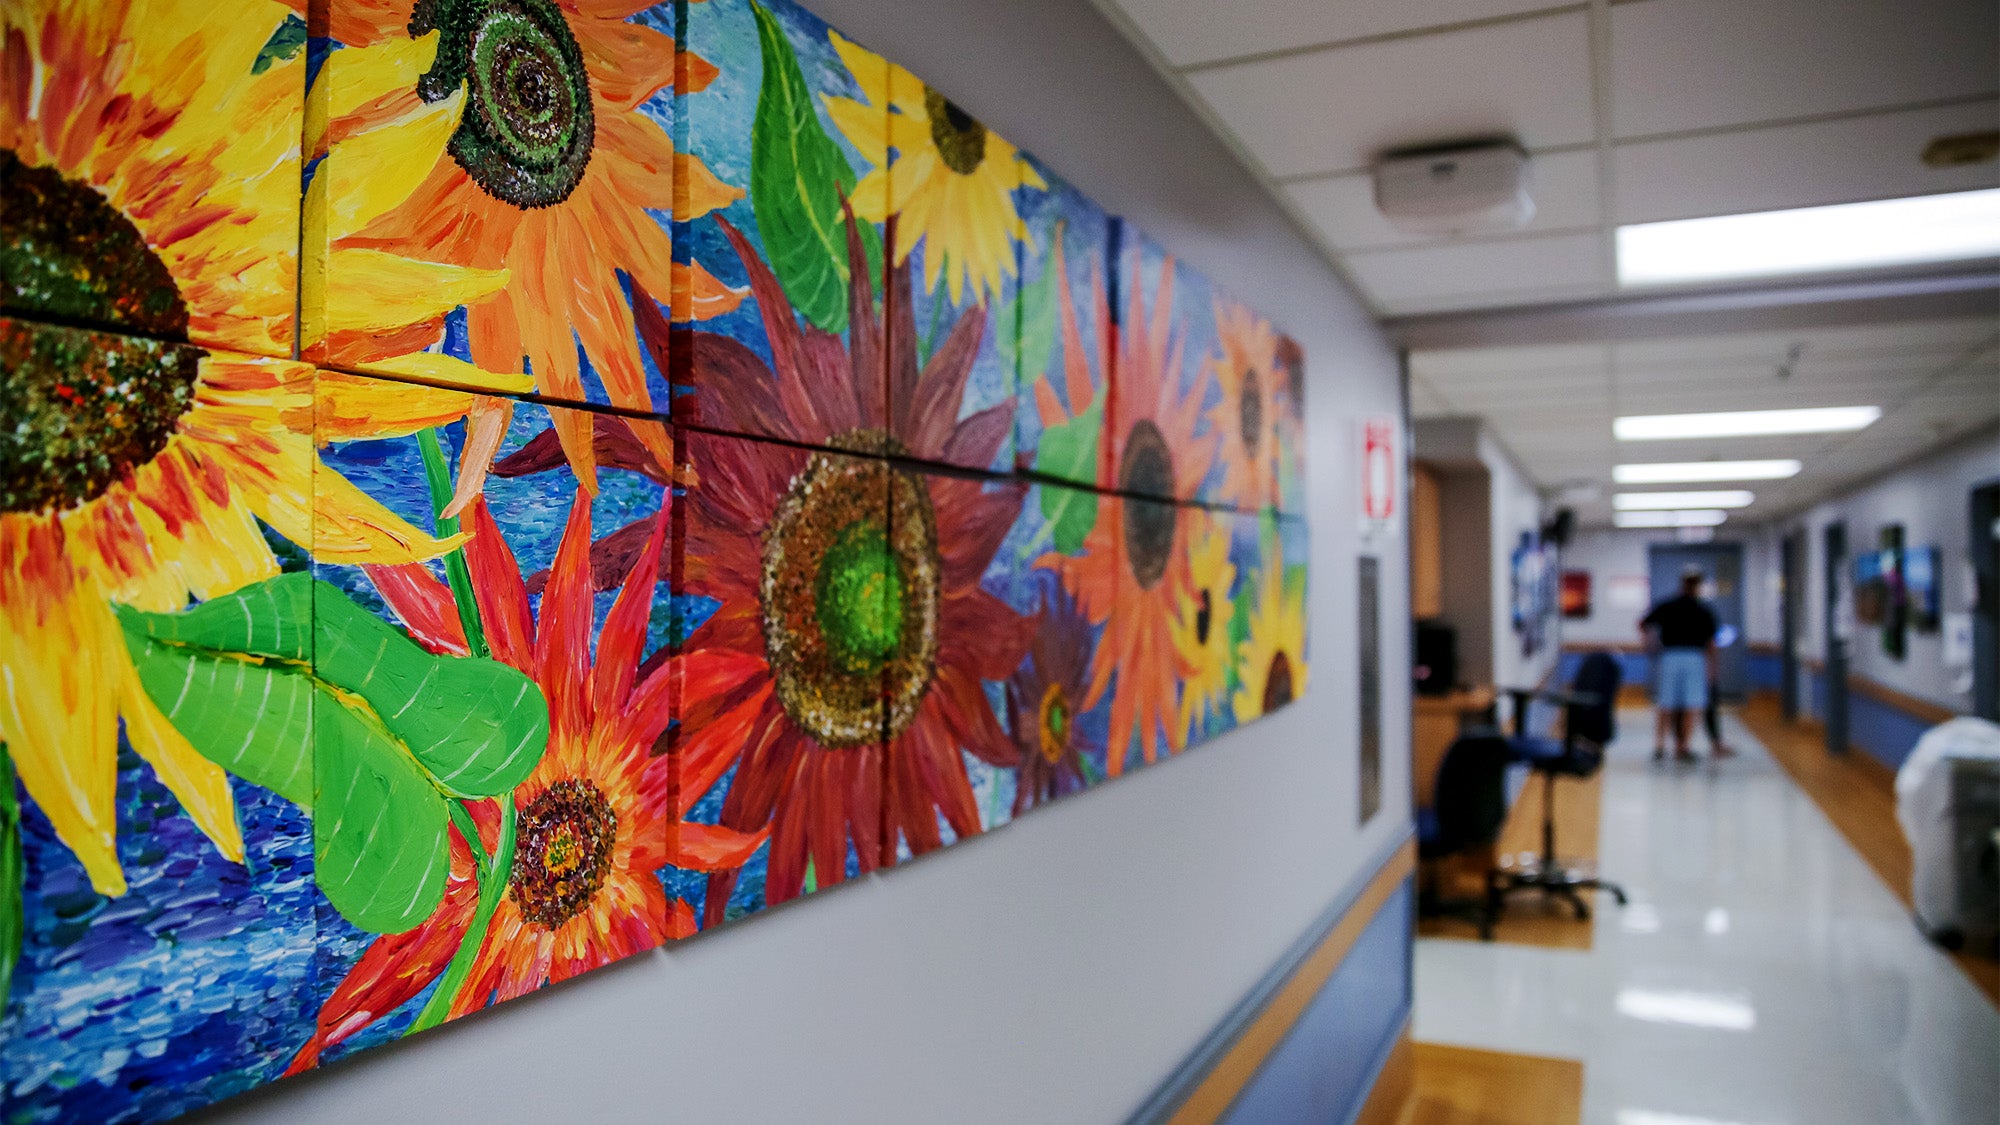 Hospital hallway decorated with colorful mural